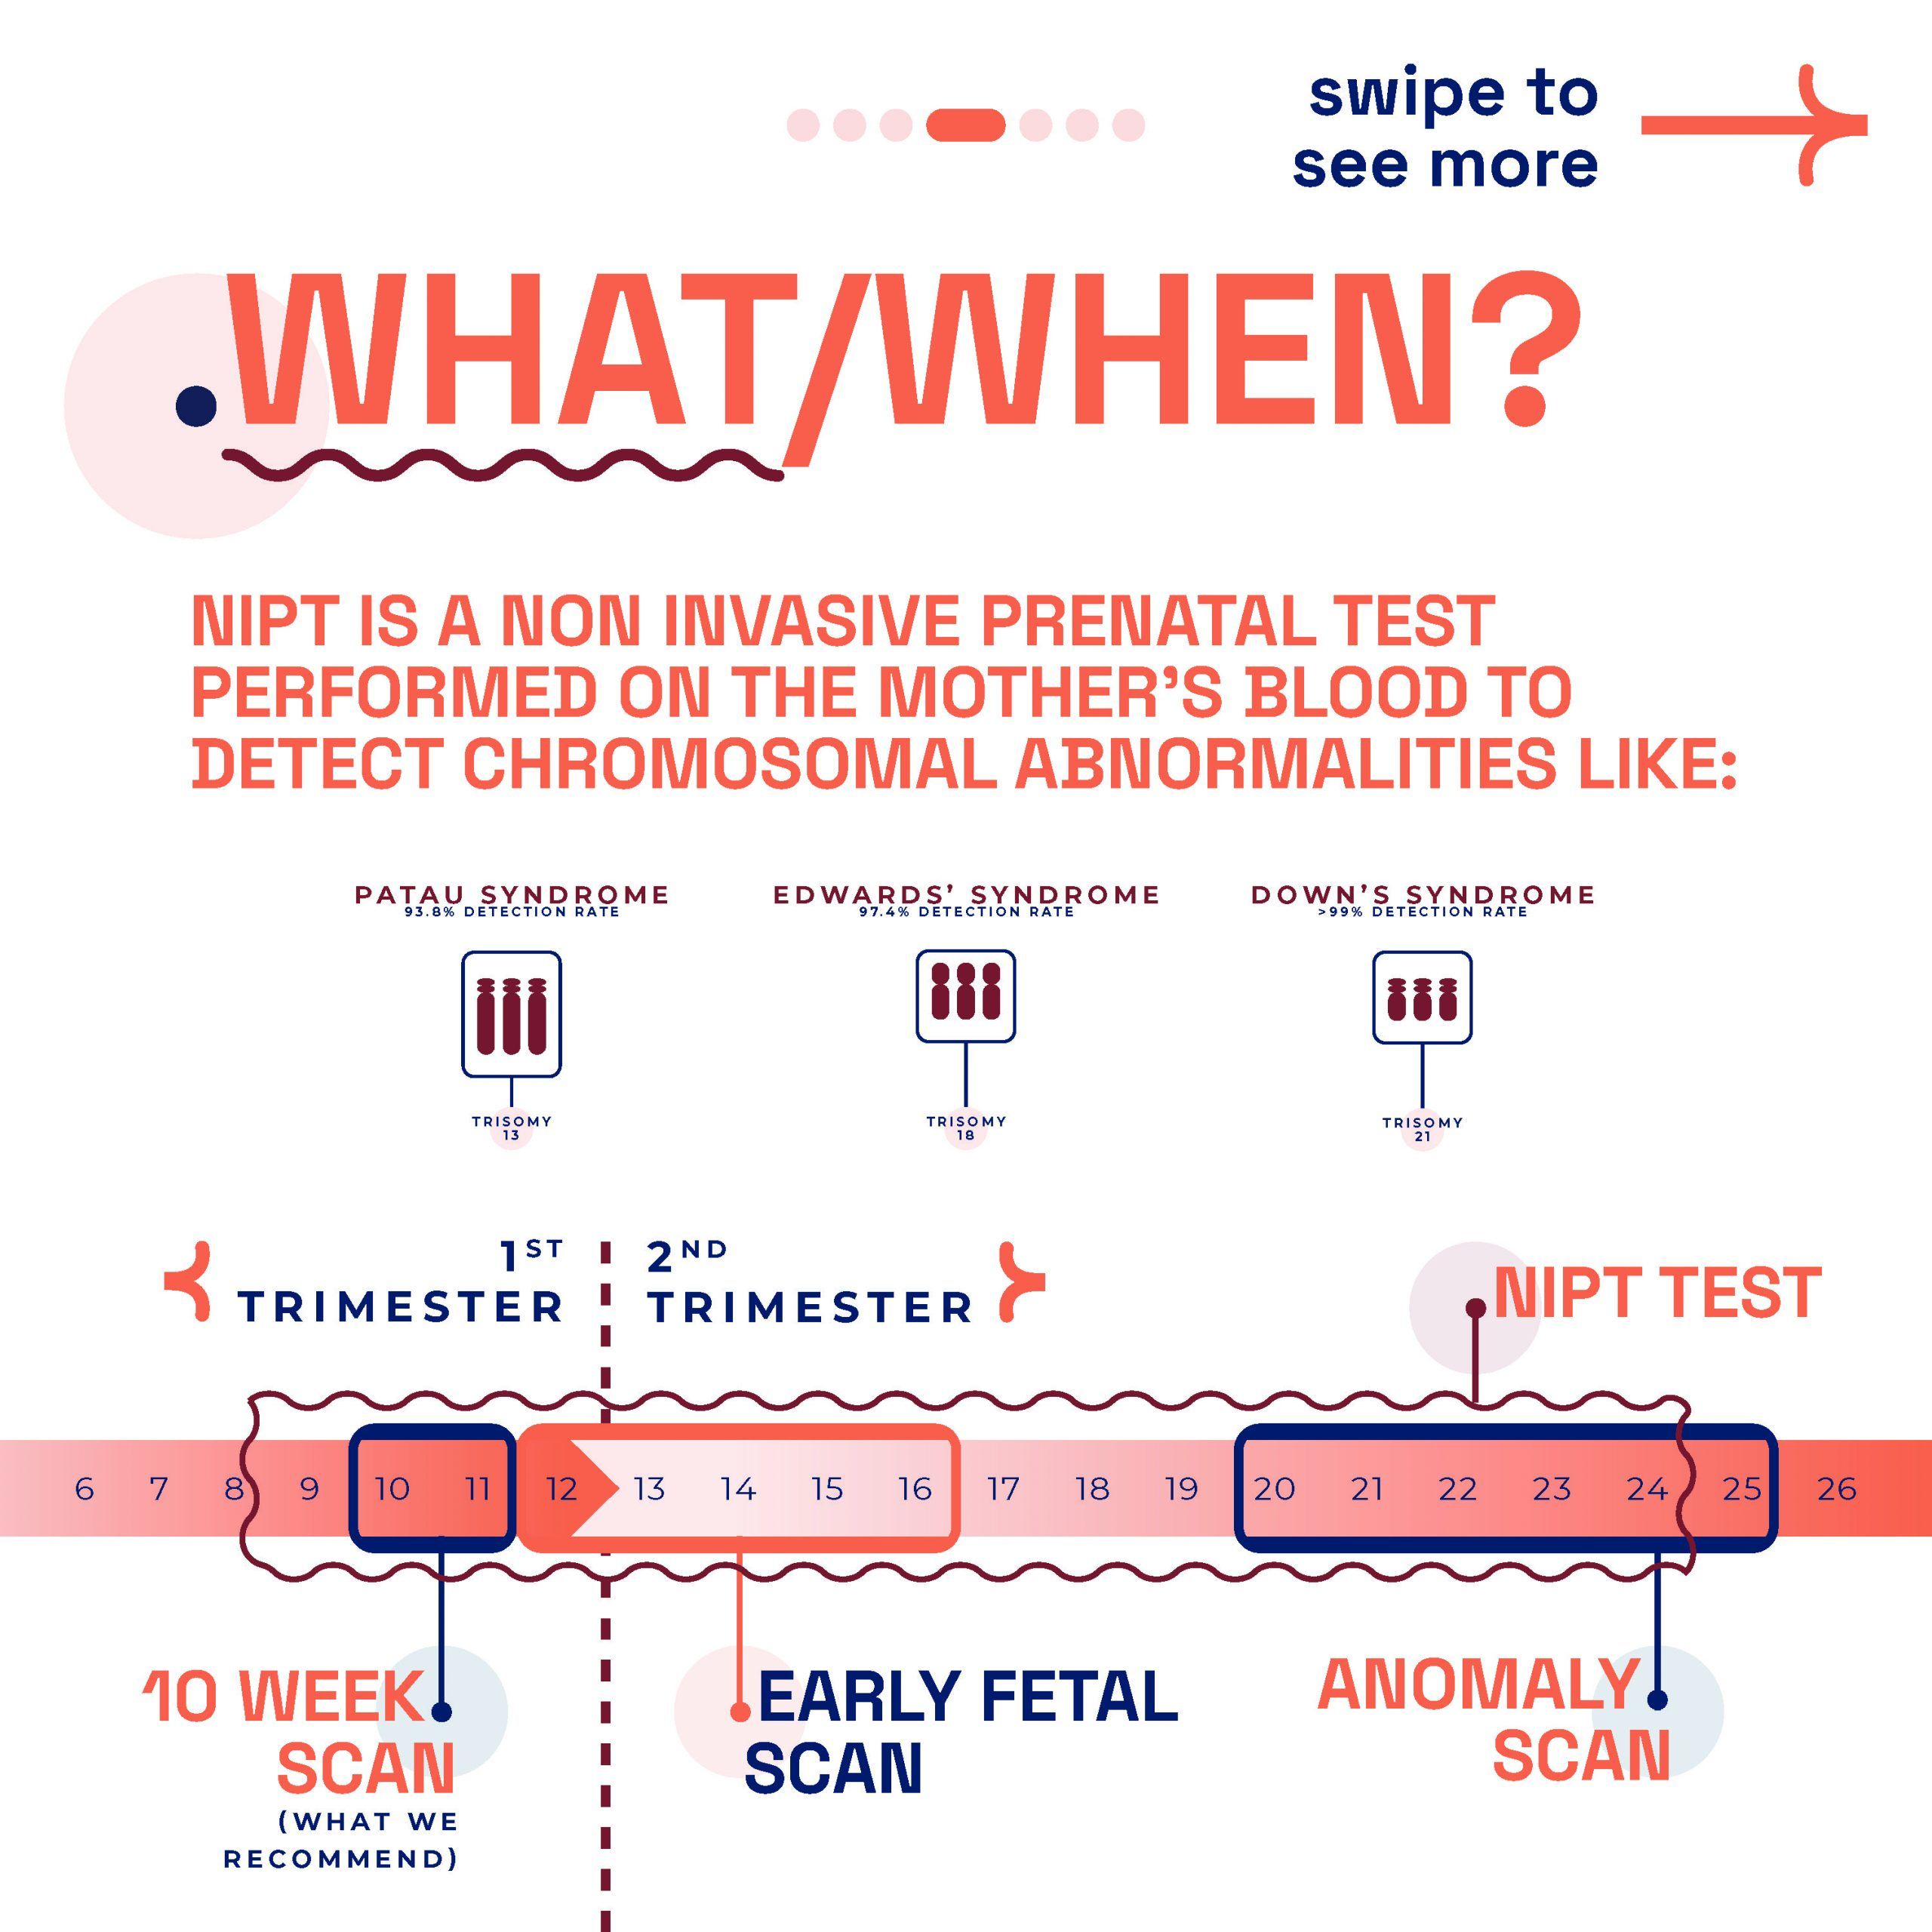 Educational infographic by London Pregnancy Clinic about NIPT, explaining what it is and the optimal timing for the test during pregnancy to detect chromosomal abnormalities.